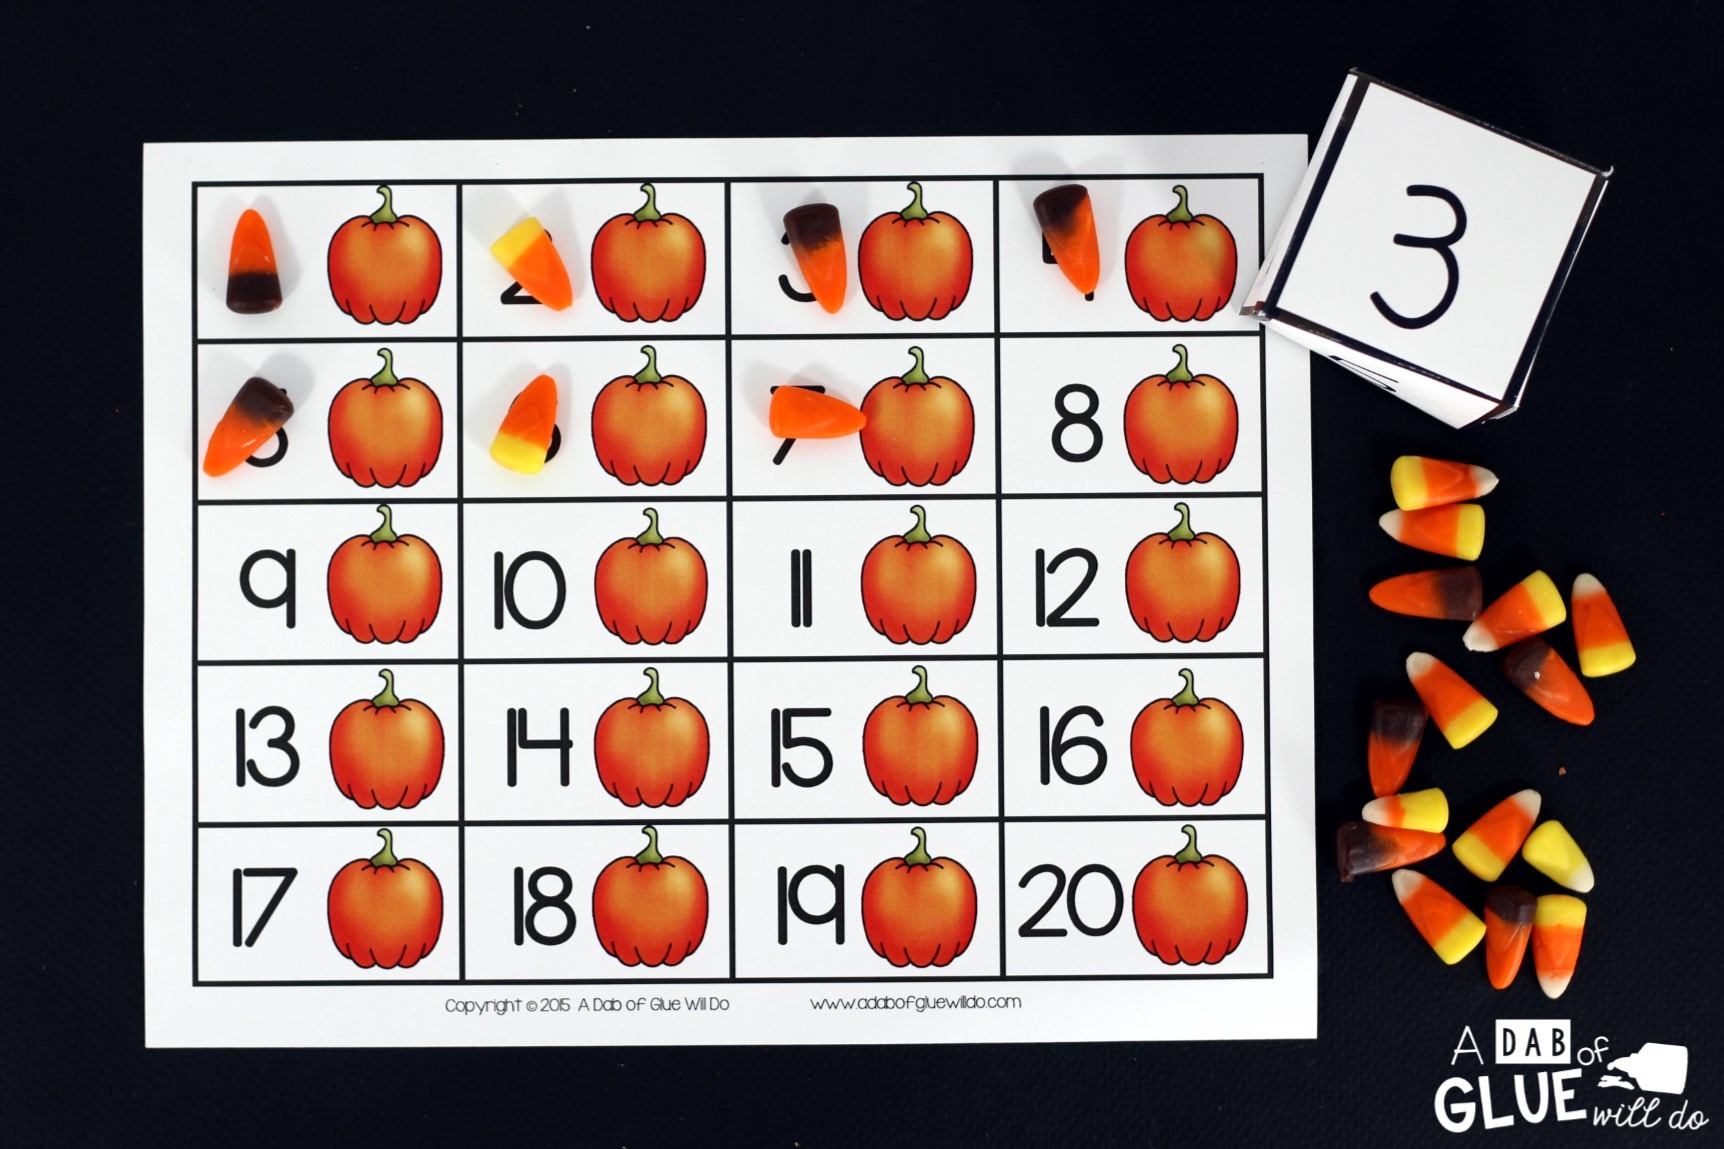 Engage your class in an exciting hands-on experience learning more about pumpkins ! Pumpkins Literacy and Math Centers are perfect for language arts and math centers in Preschool, Kindergarten, and First Grade classrooms and packed full of inviting student activities. Celebrate Fall with pumpkin themed center student worksheets. Students will learn more about pumpkins using puzzles, worksheets, clip cards, and subtraction mats. This pack is great for homeschoolers, hands-on kids activities, and to add to your unit studies! Teachers will receive the complete unit for Autumn pumpkin math and literacy activities to help teach the ocean to your lower elementary students!